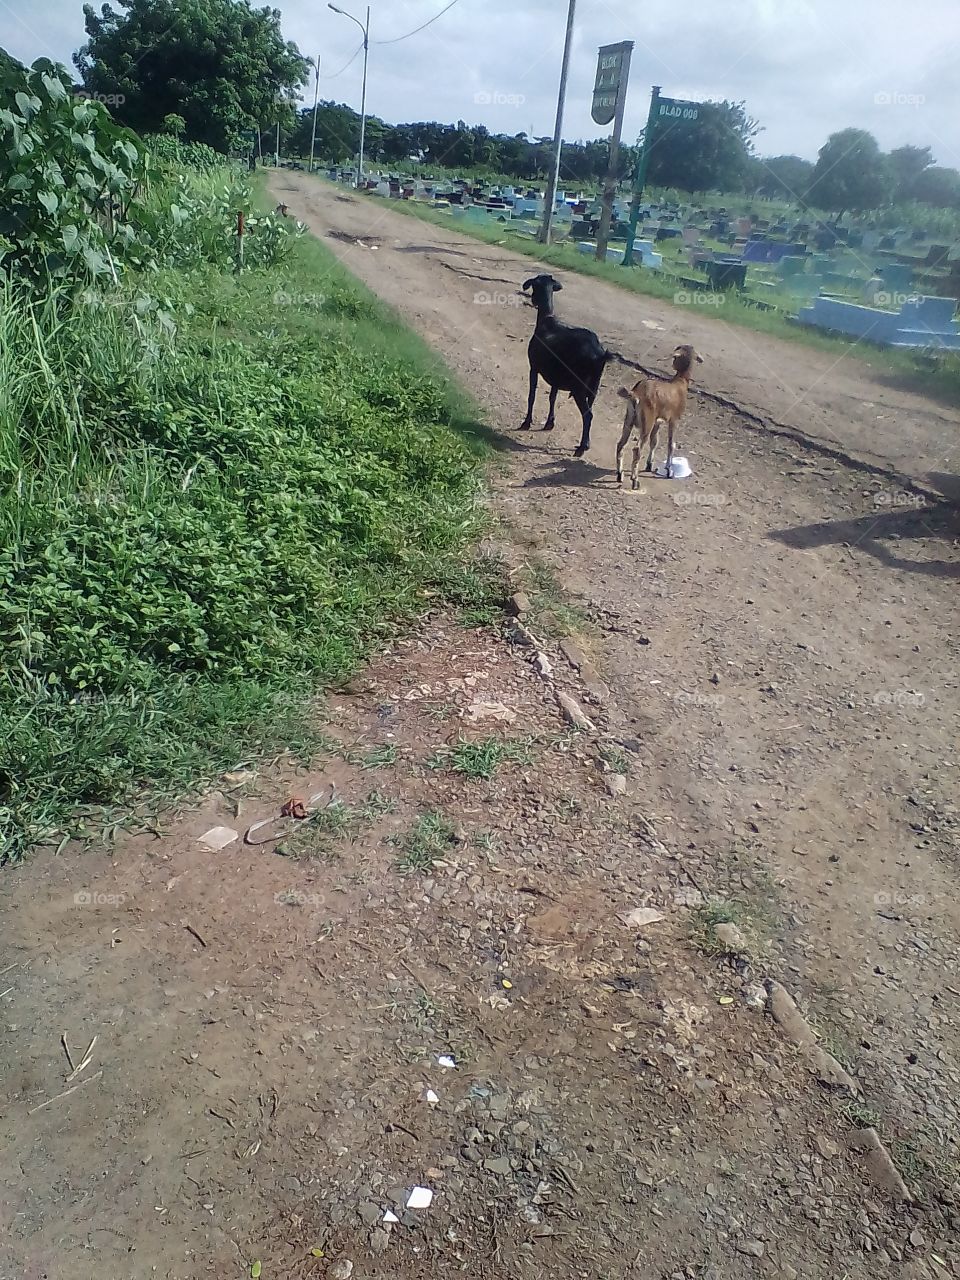 There is a female goat with her child looking for food by the side of the path